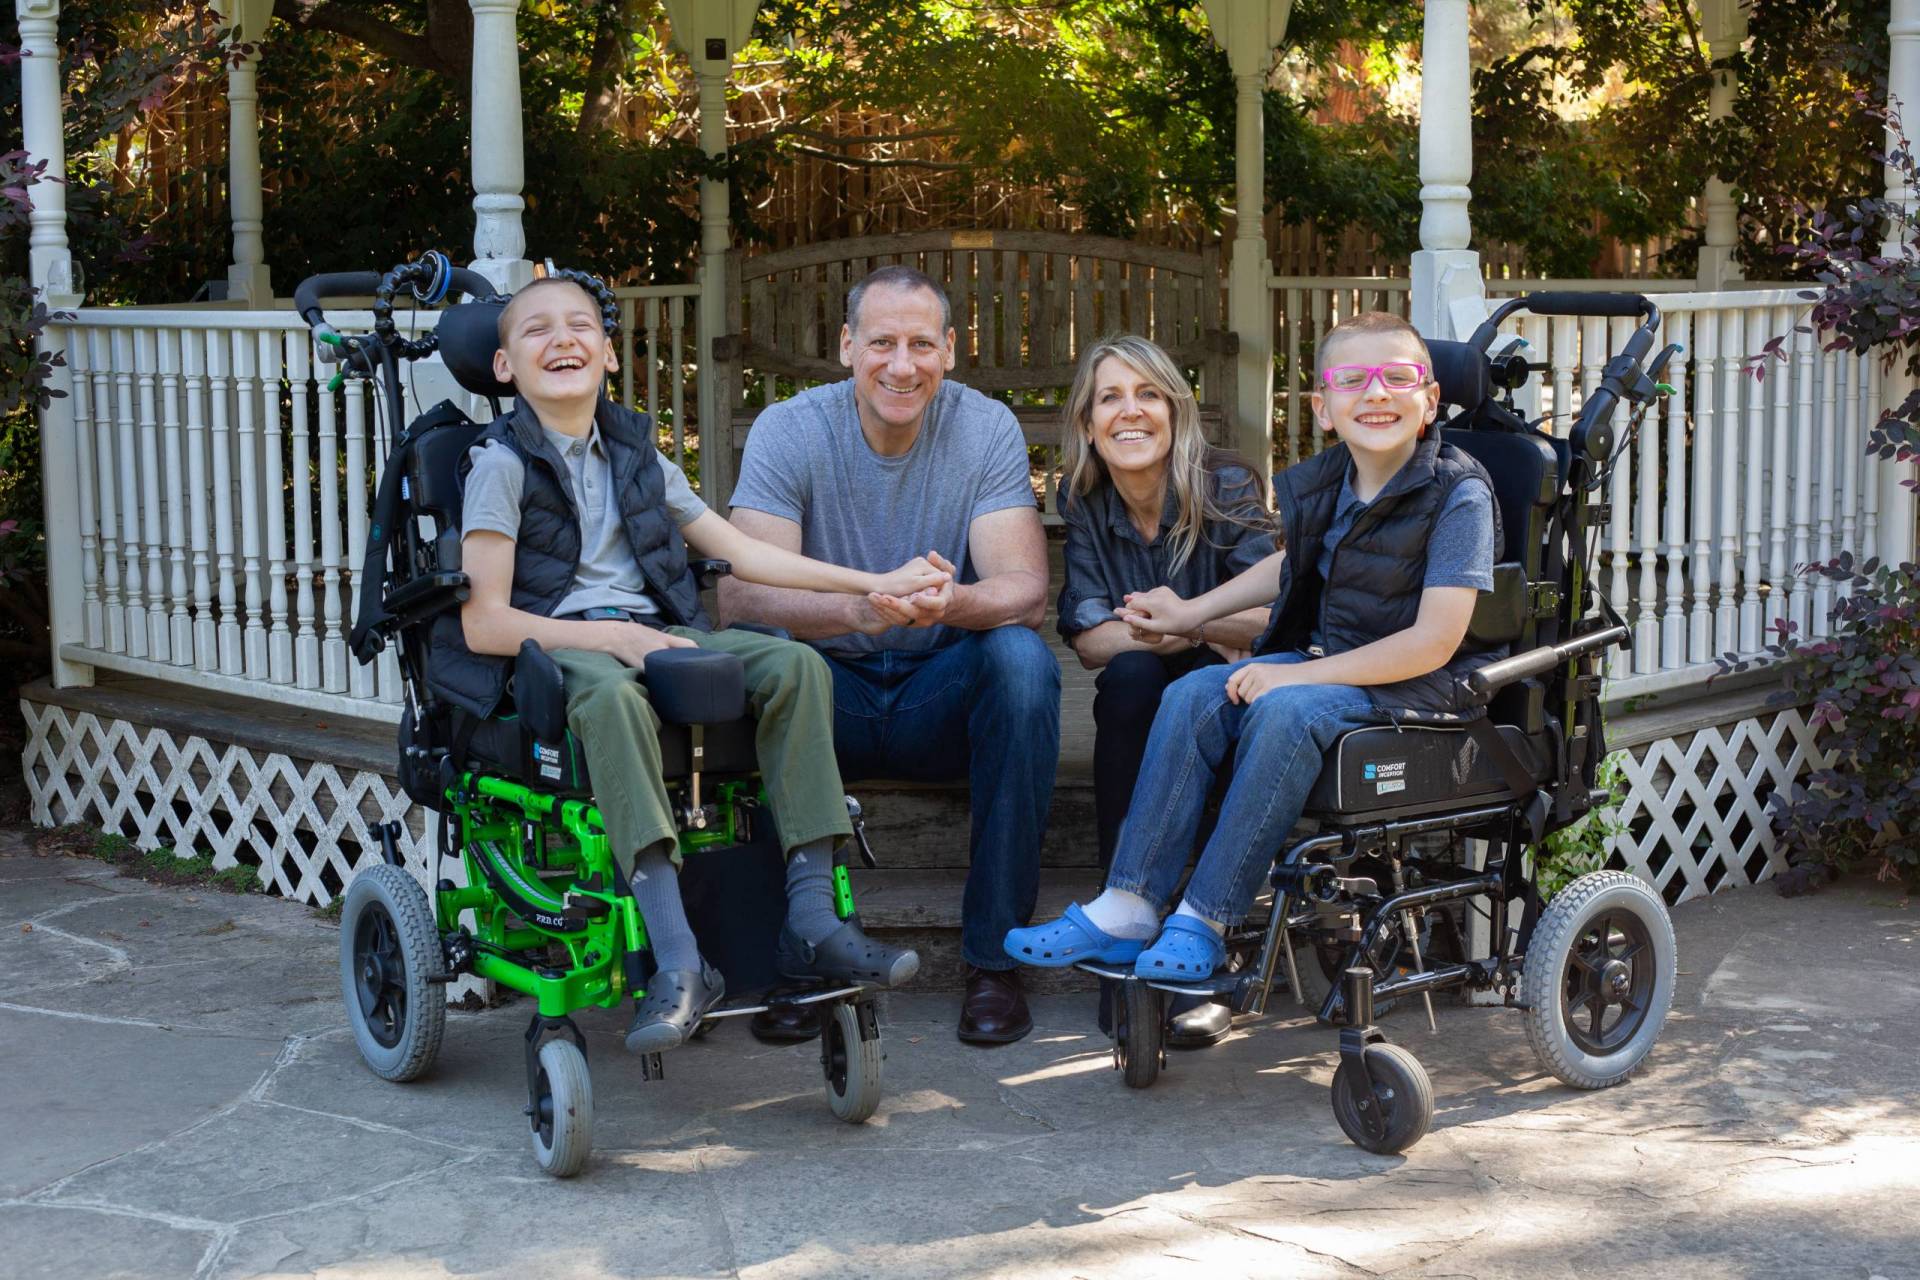 A family of four, with two boys in wheelchairs and a mother and father in the middle.